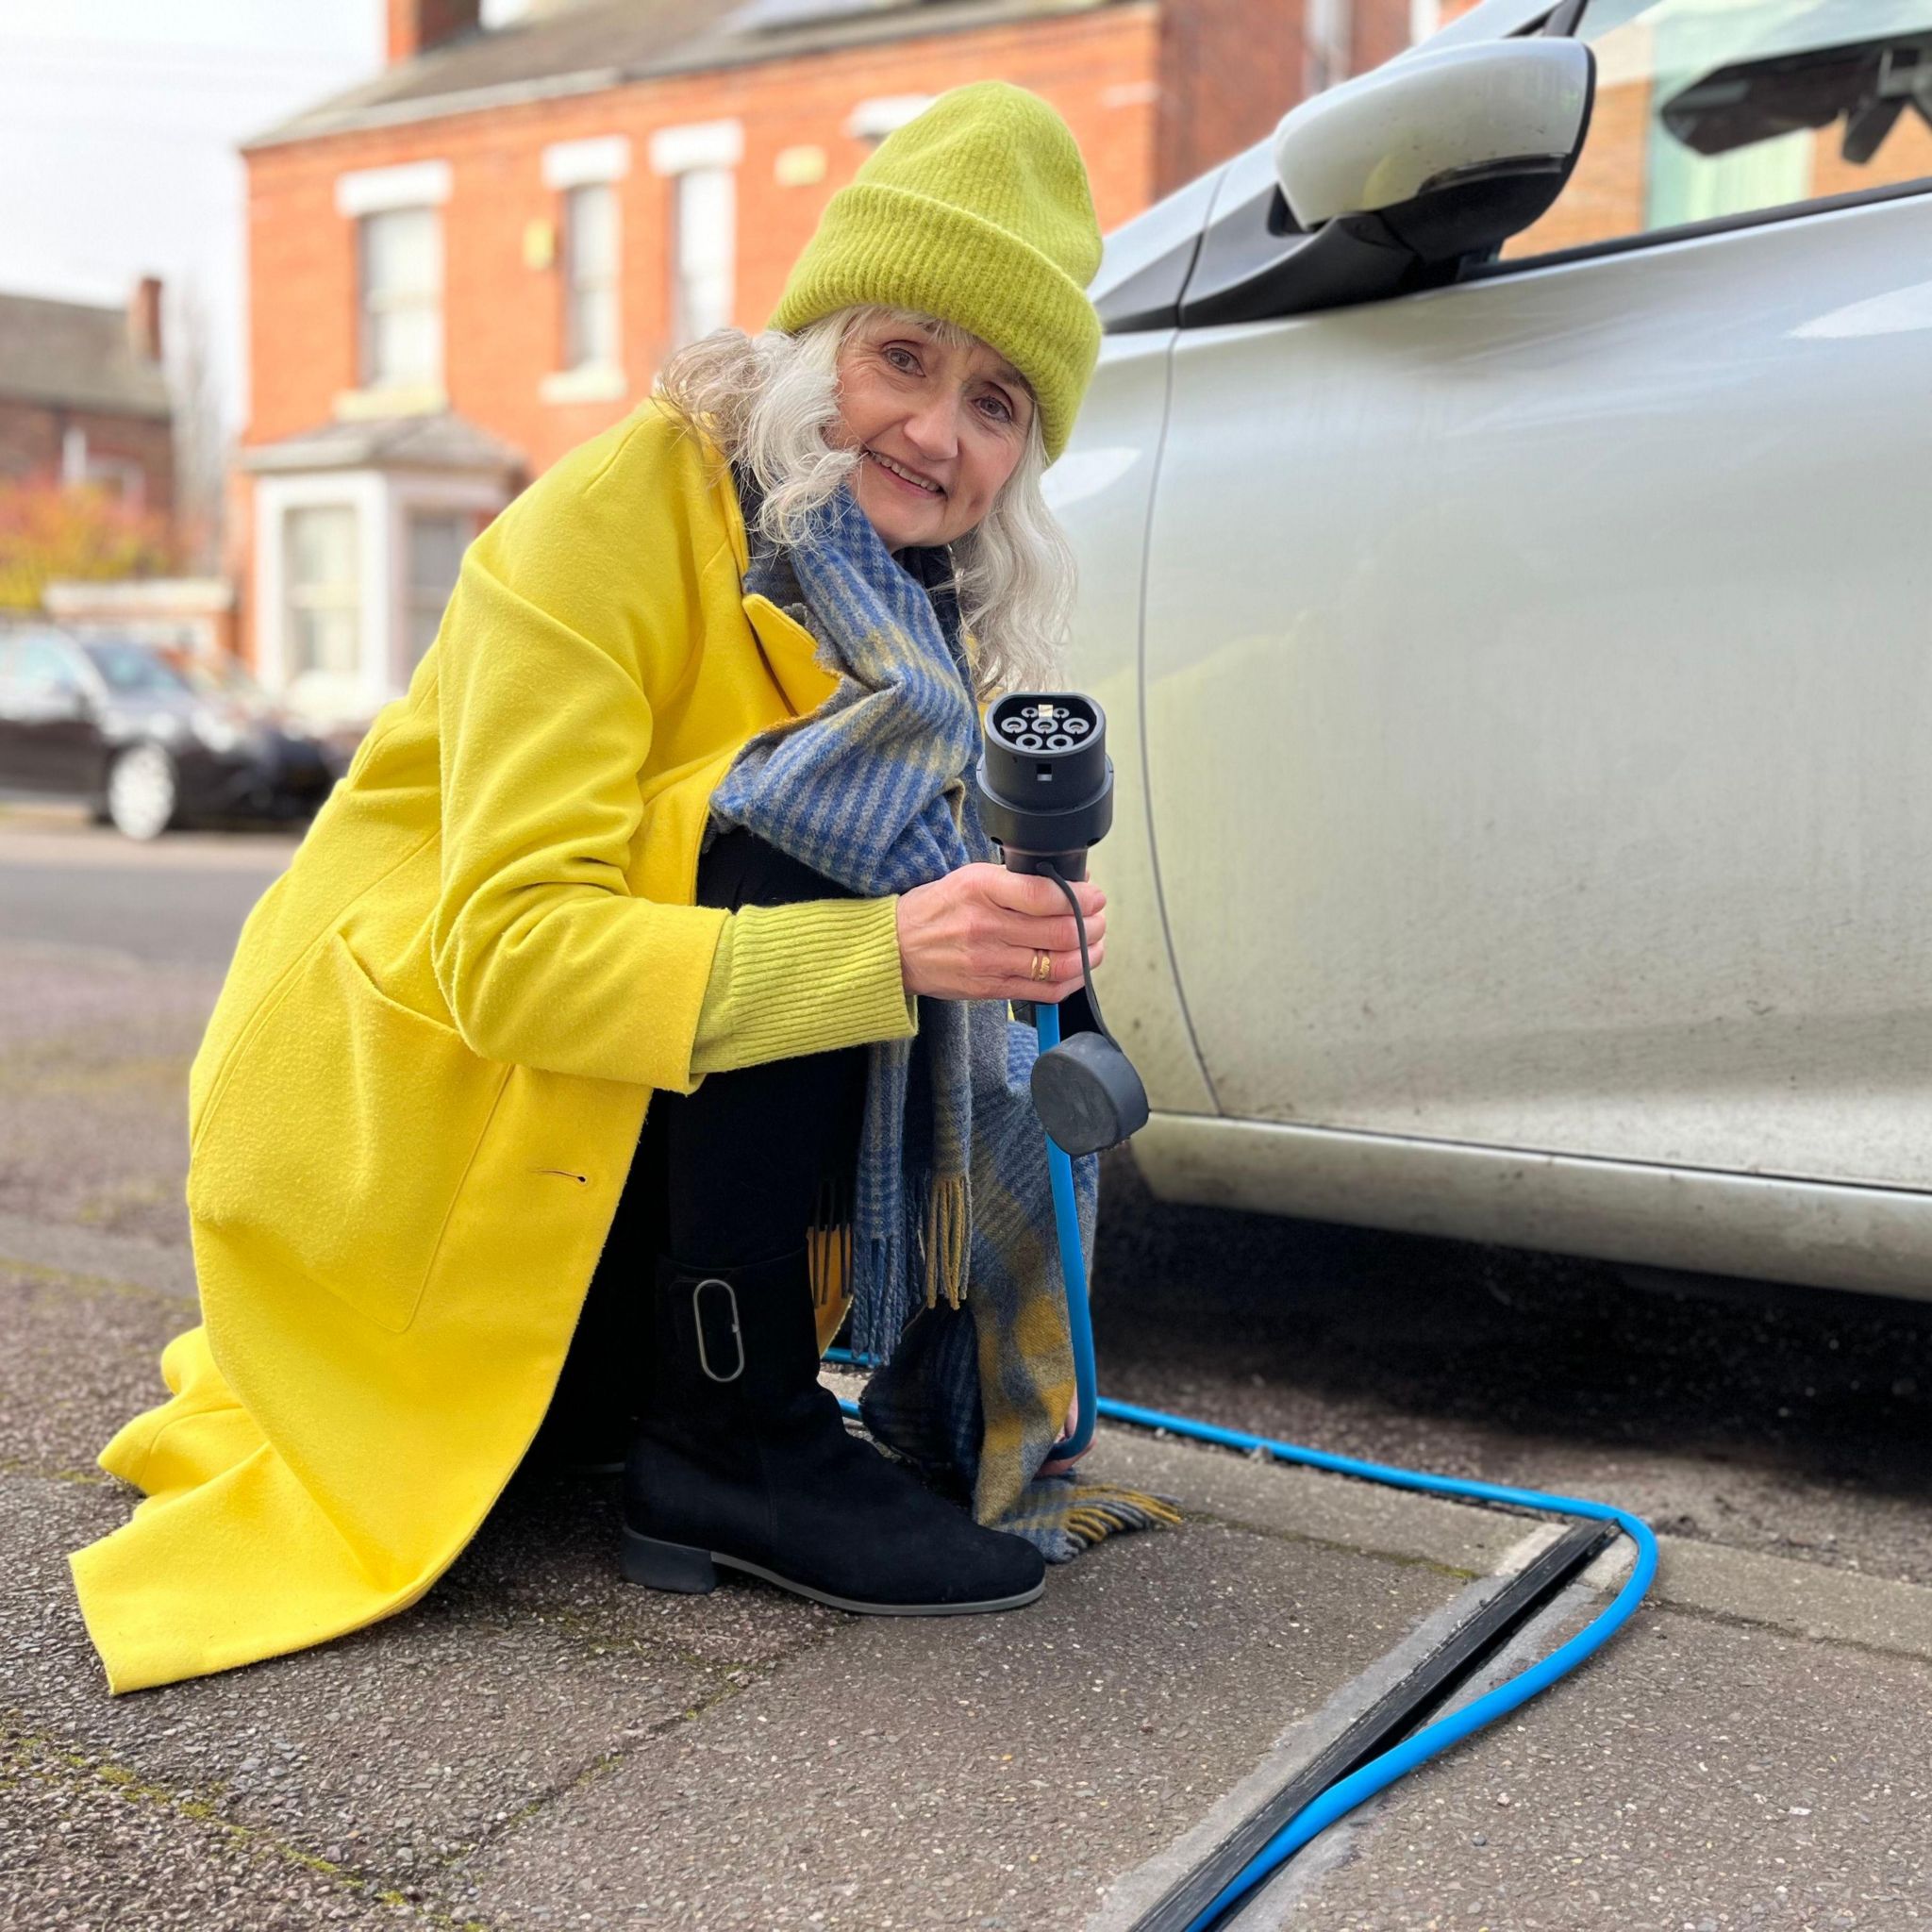 A woman crouching down next to a car holding an electric charger